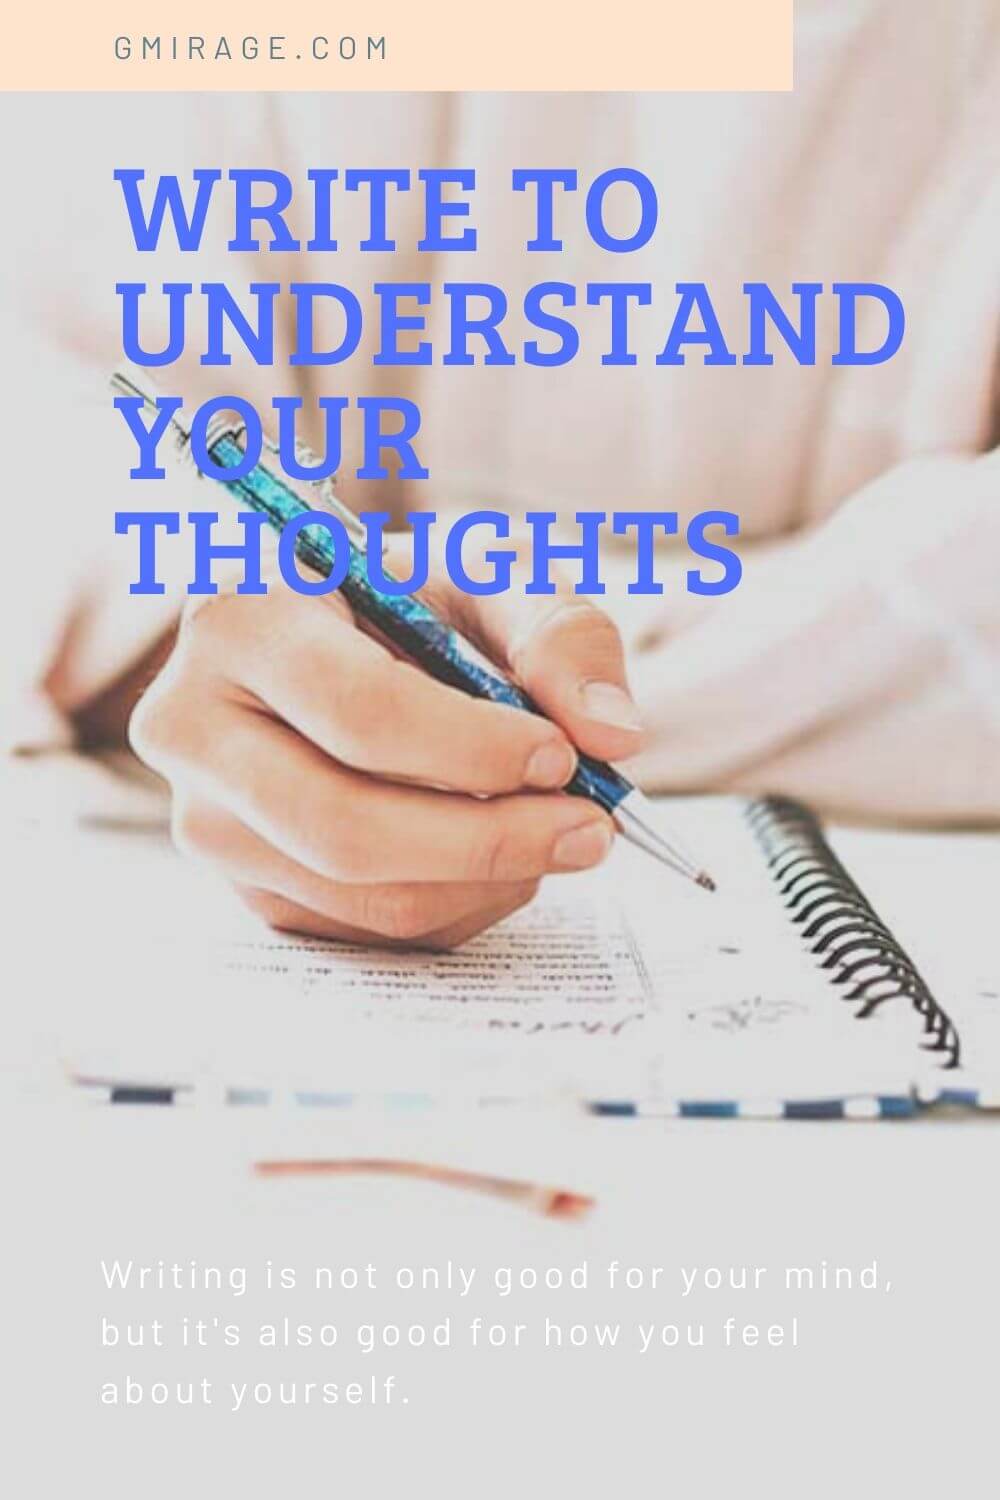 Write to understand your thoughts, it might be a thing of the not-so-distant past, but there are a lot of benefits for doing it. Writing is not only good for your mind, but for how you feel about yourself.